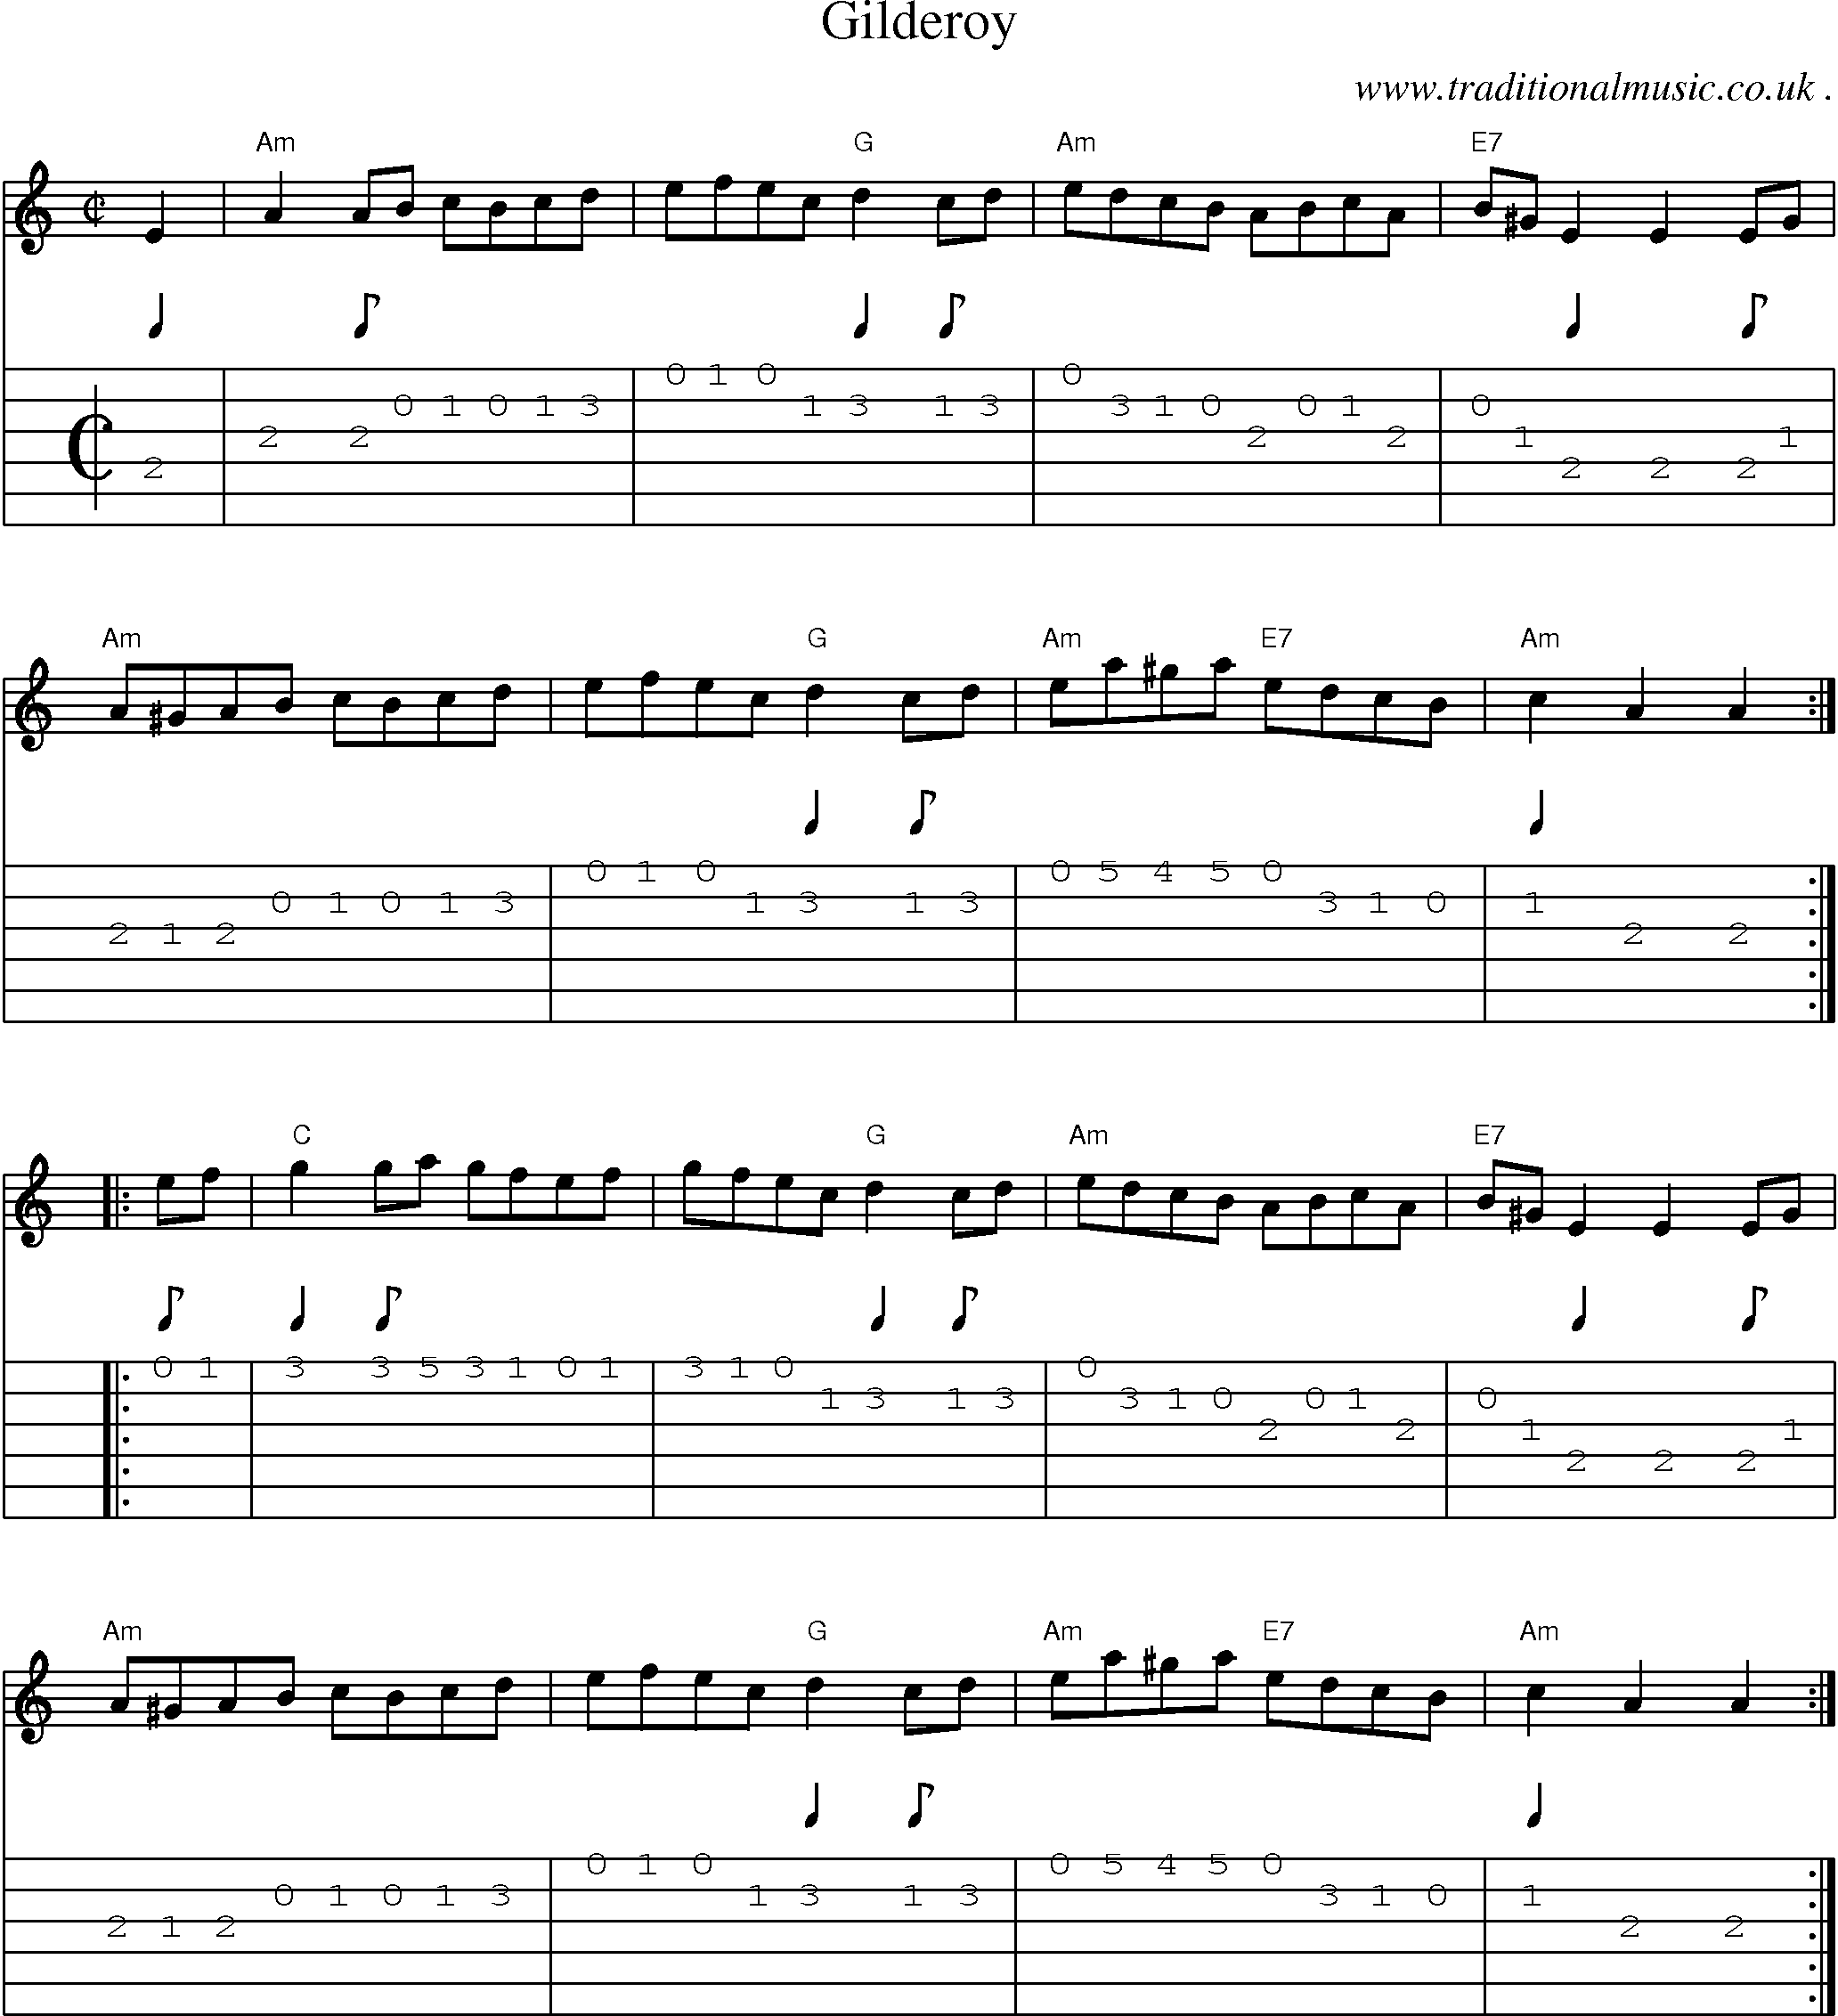 Music Score and Guitar Tabs for Gilderoy